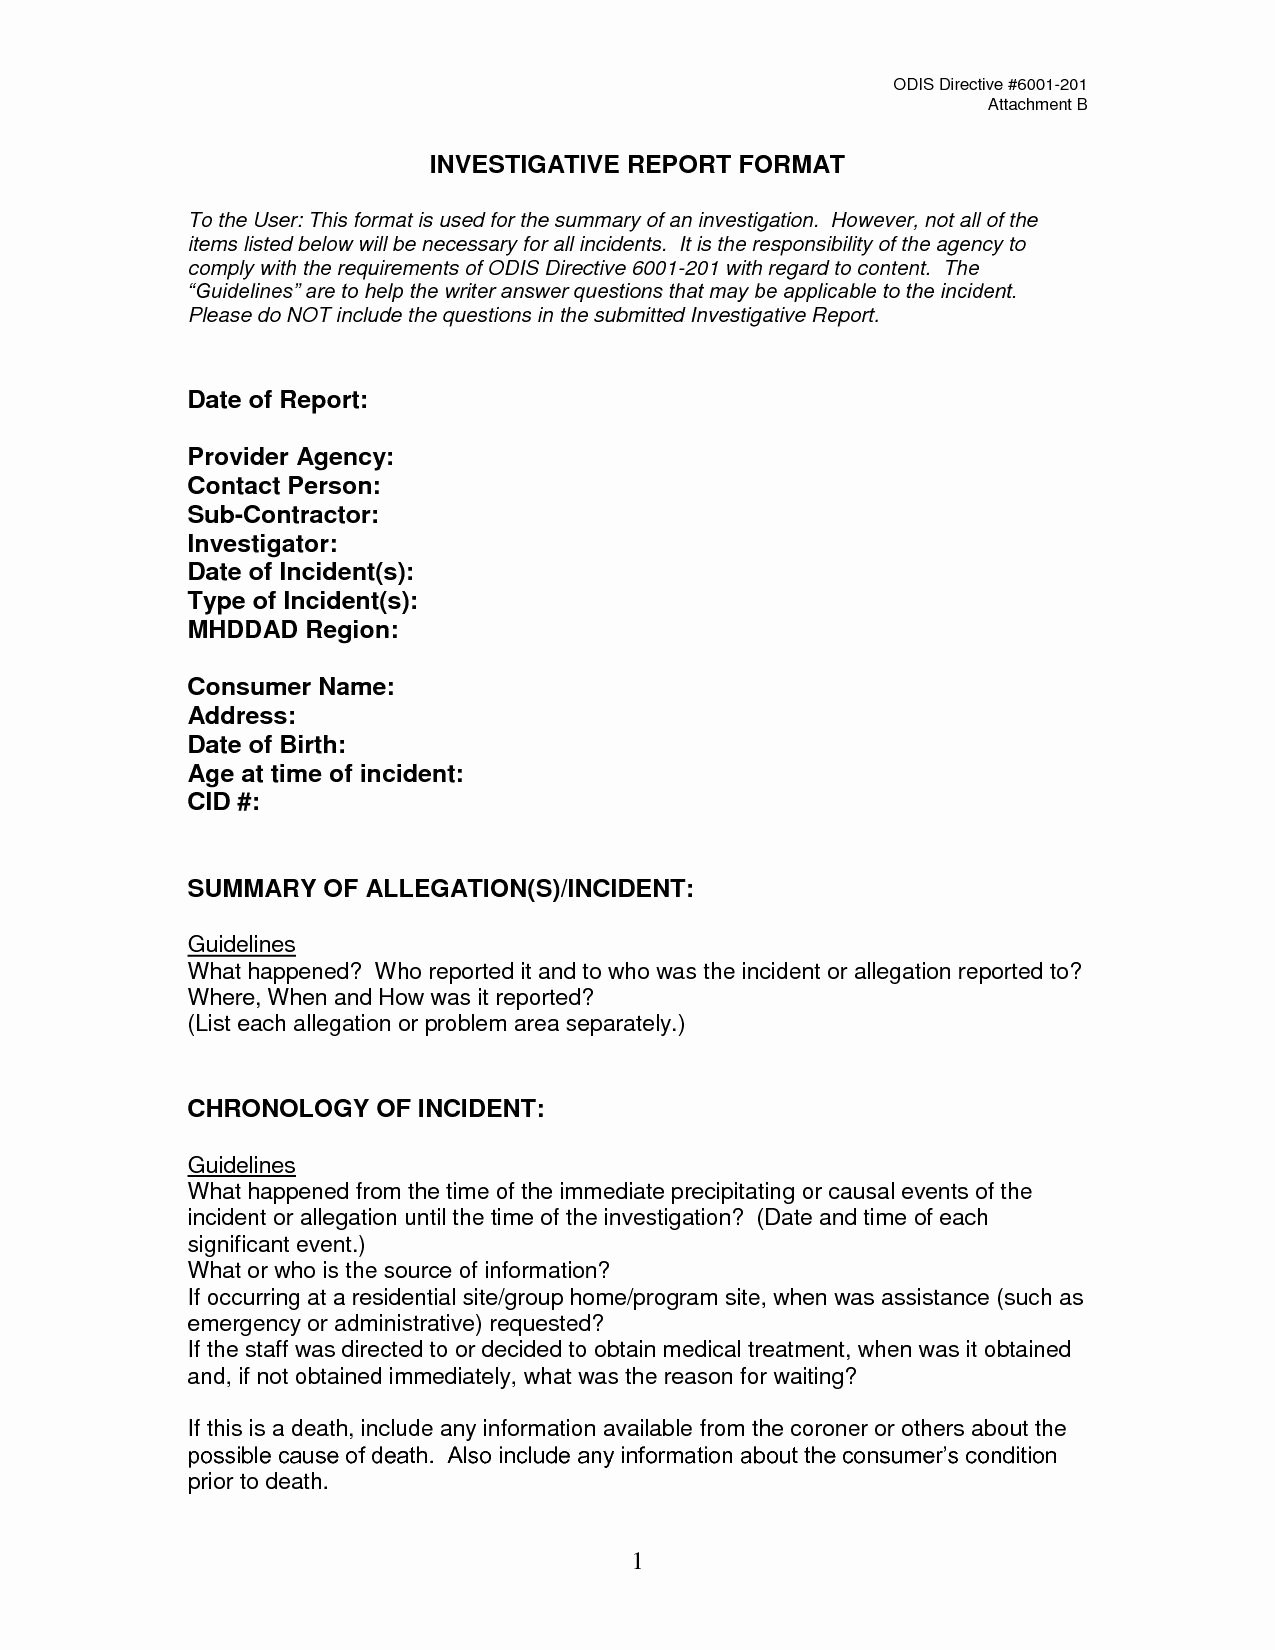 Sample Employee Incident Report Letter New Incident Report Letter Sample In Workplace